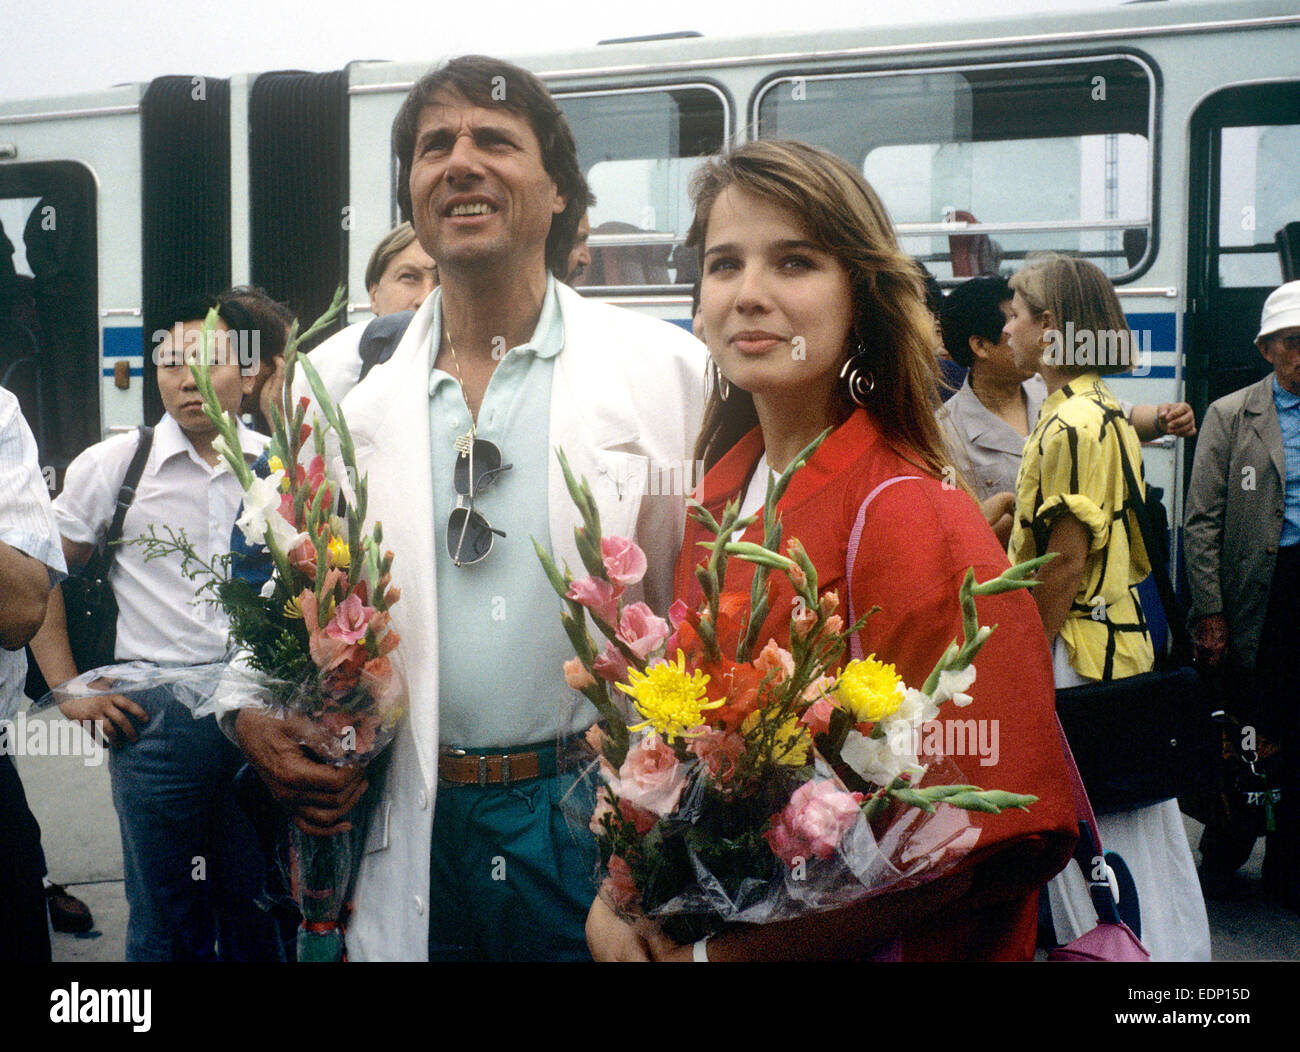 Desiree Nosbusch and singer Udo Jürgens in June 1987 in Beijing. Actress Desiree Nosbusch - also known as Desiree Becker - was born on 14 January 1965 in Esch in Luxembourg. Stock Photo